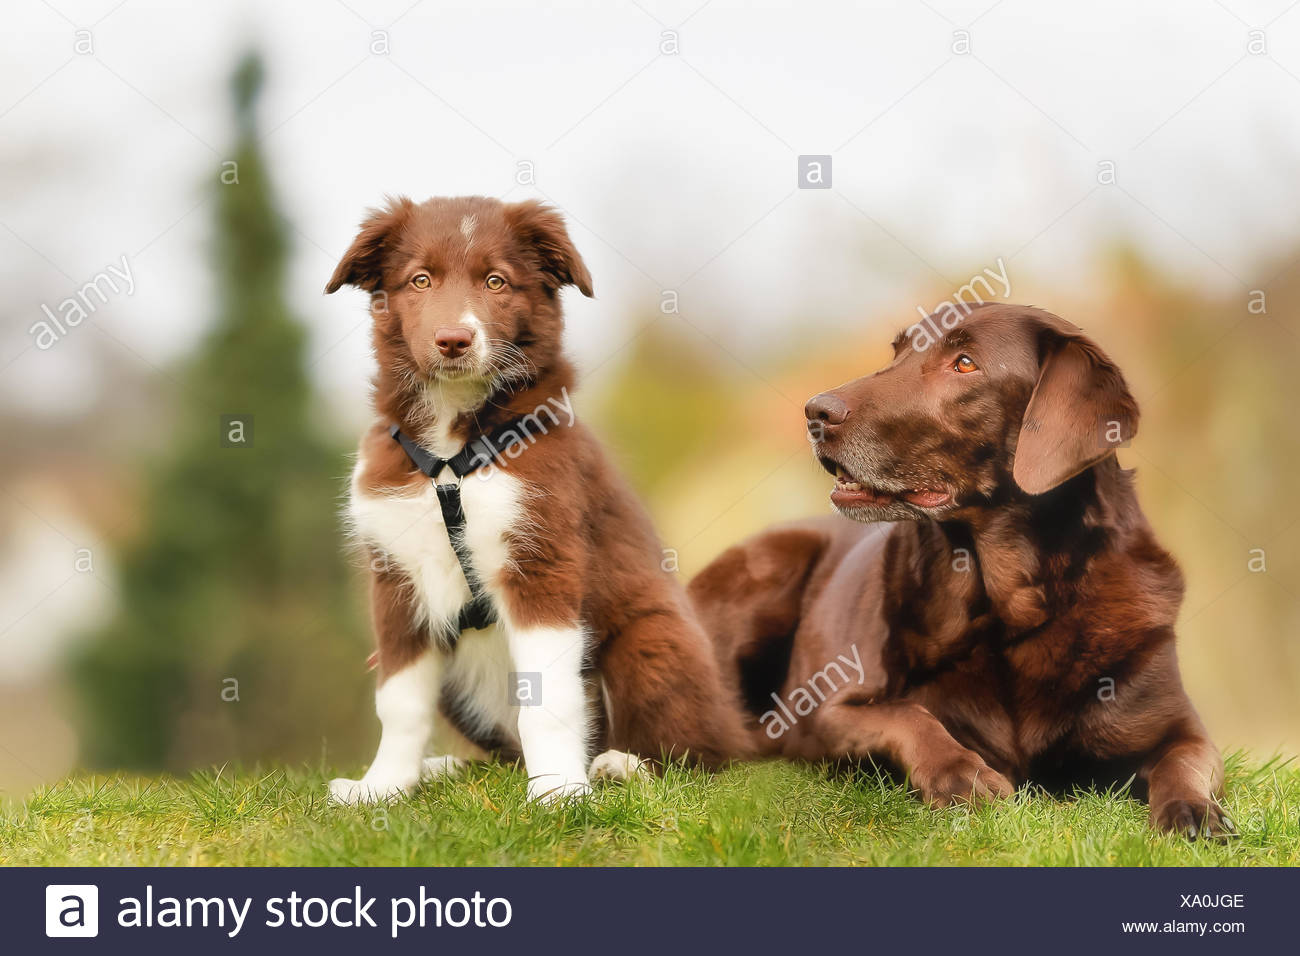 Adult Brown Labrador And Brown And White Border Collie Puppy Stock Photo Alamy